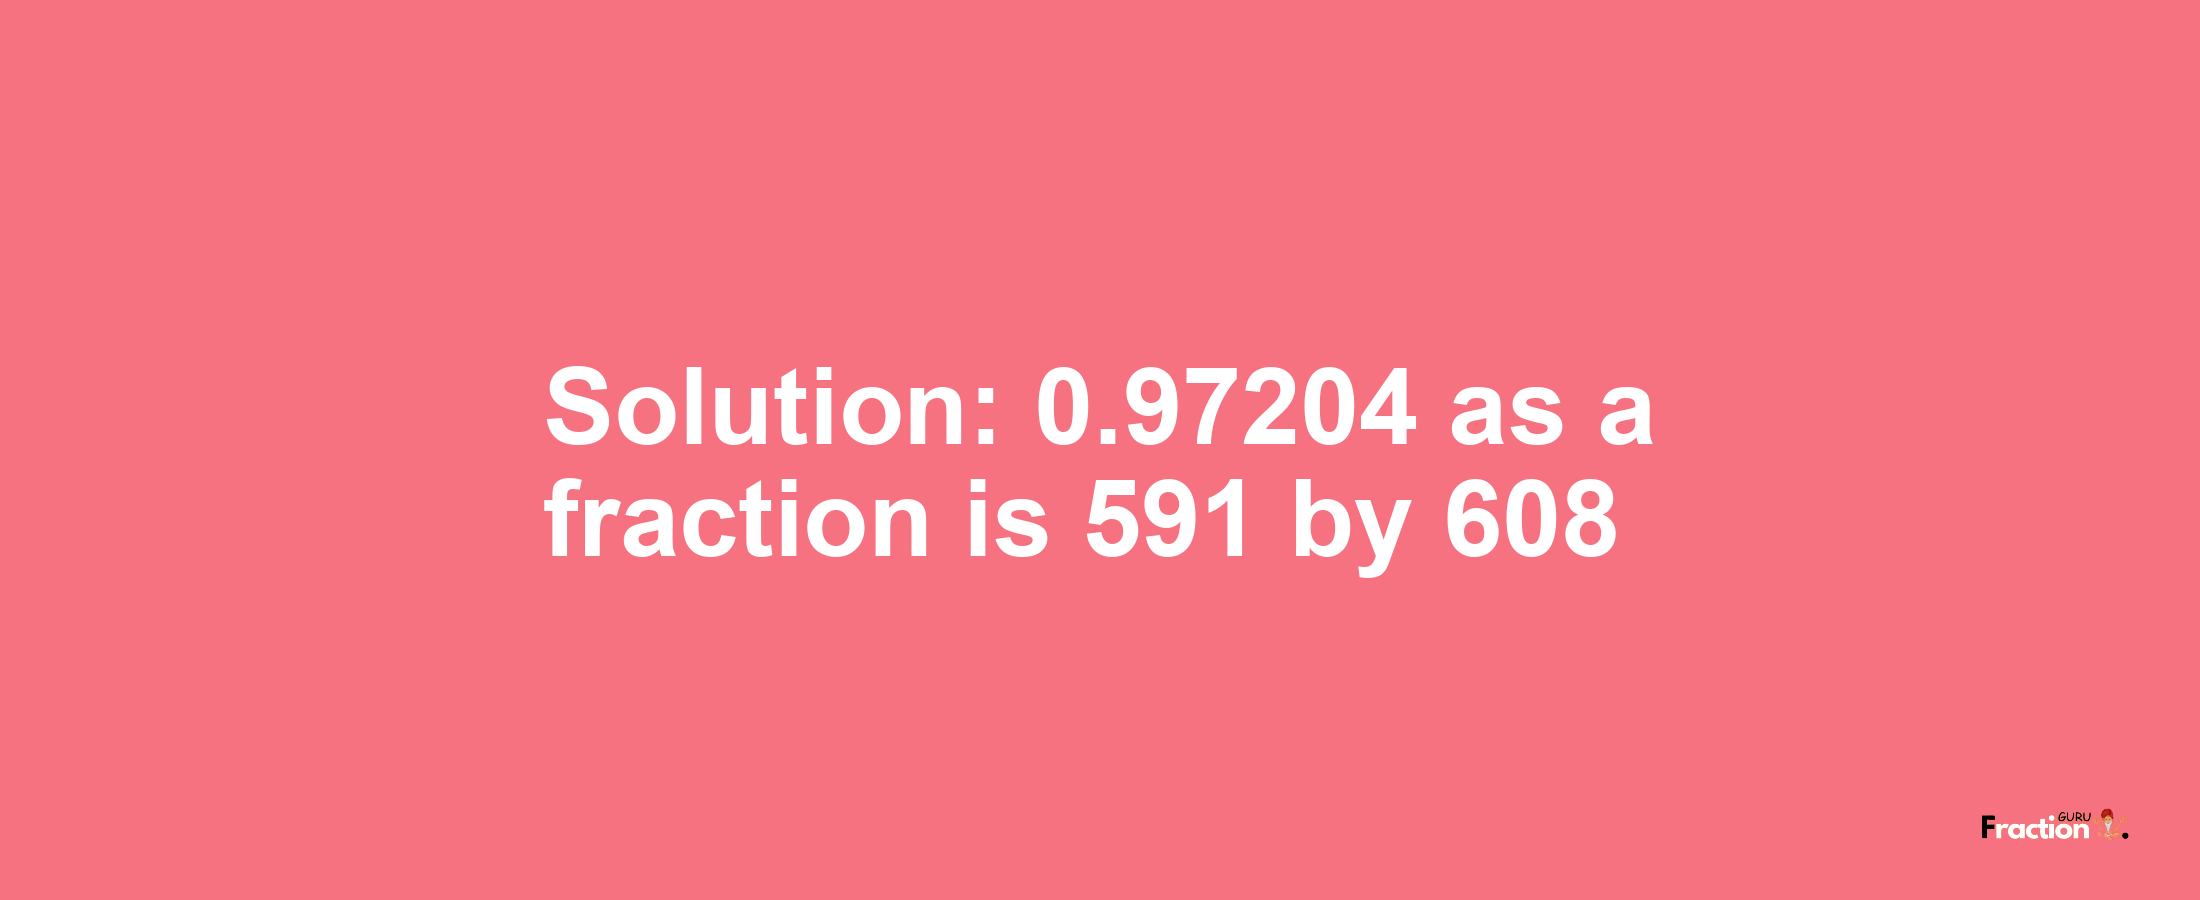 Solution:0.97204 as a fraction is 591/608